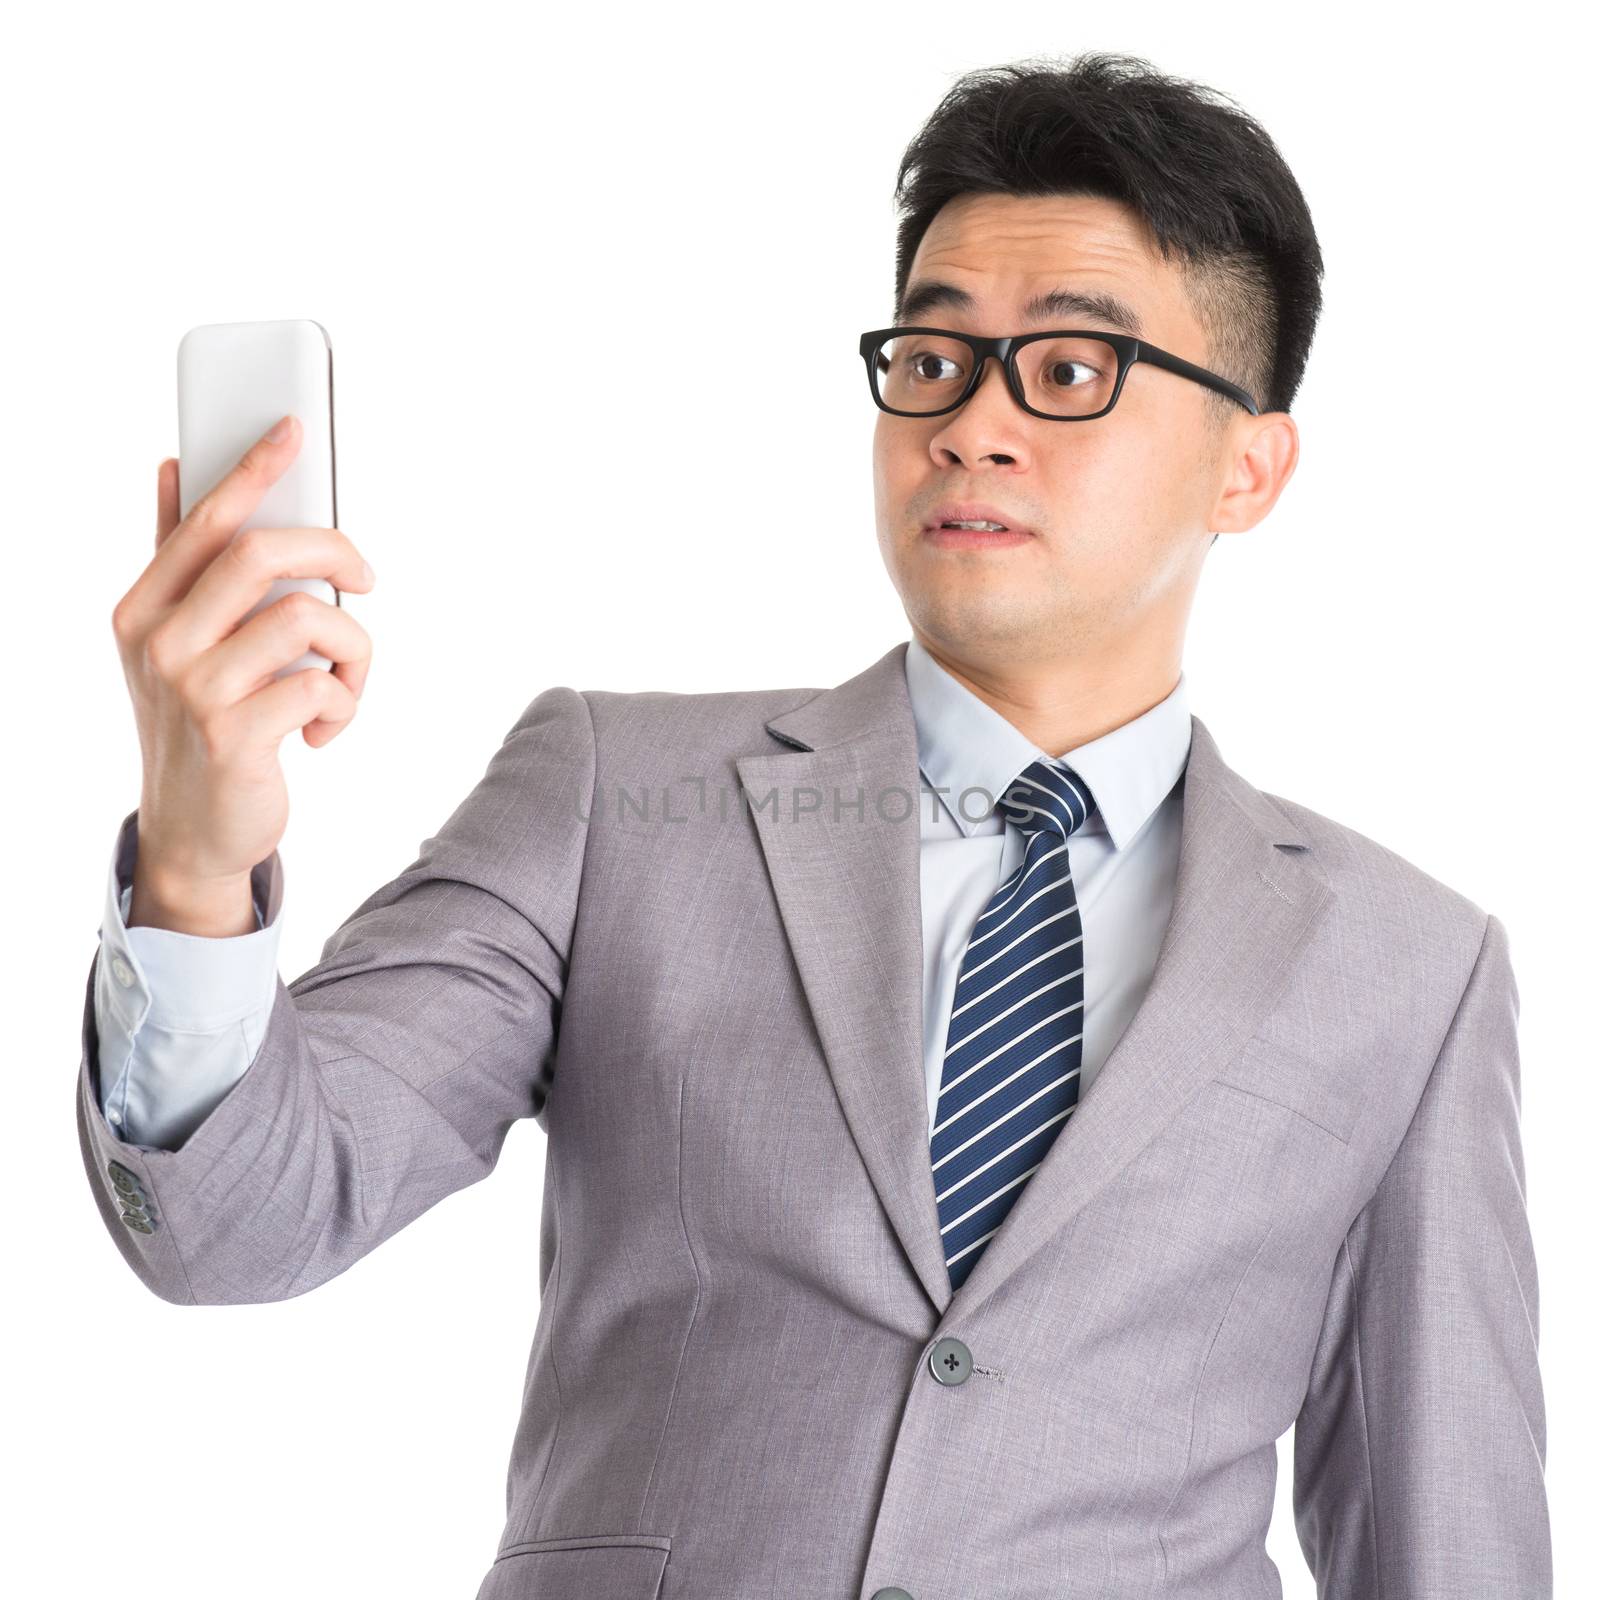 Get shocked while reading on smart phone. by szefei